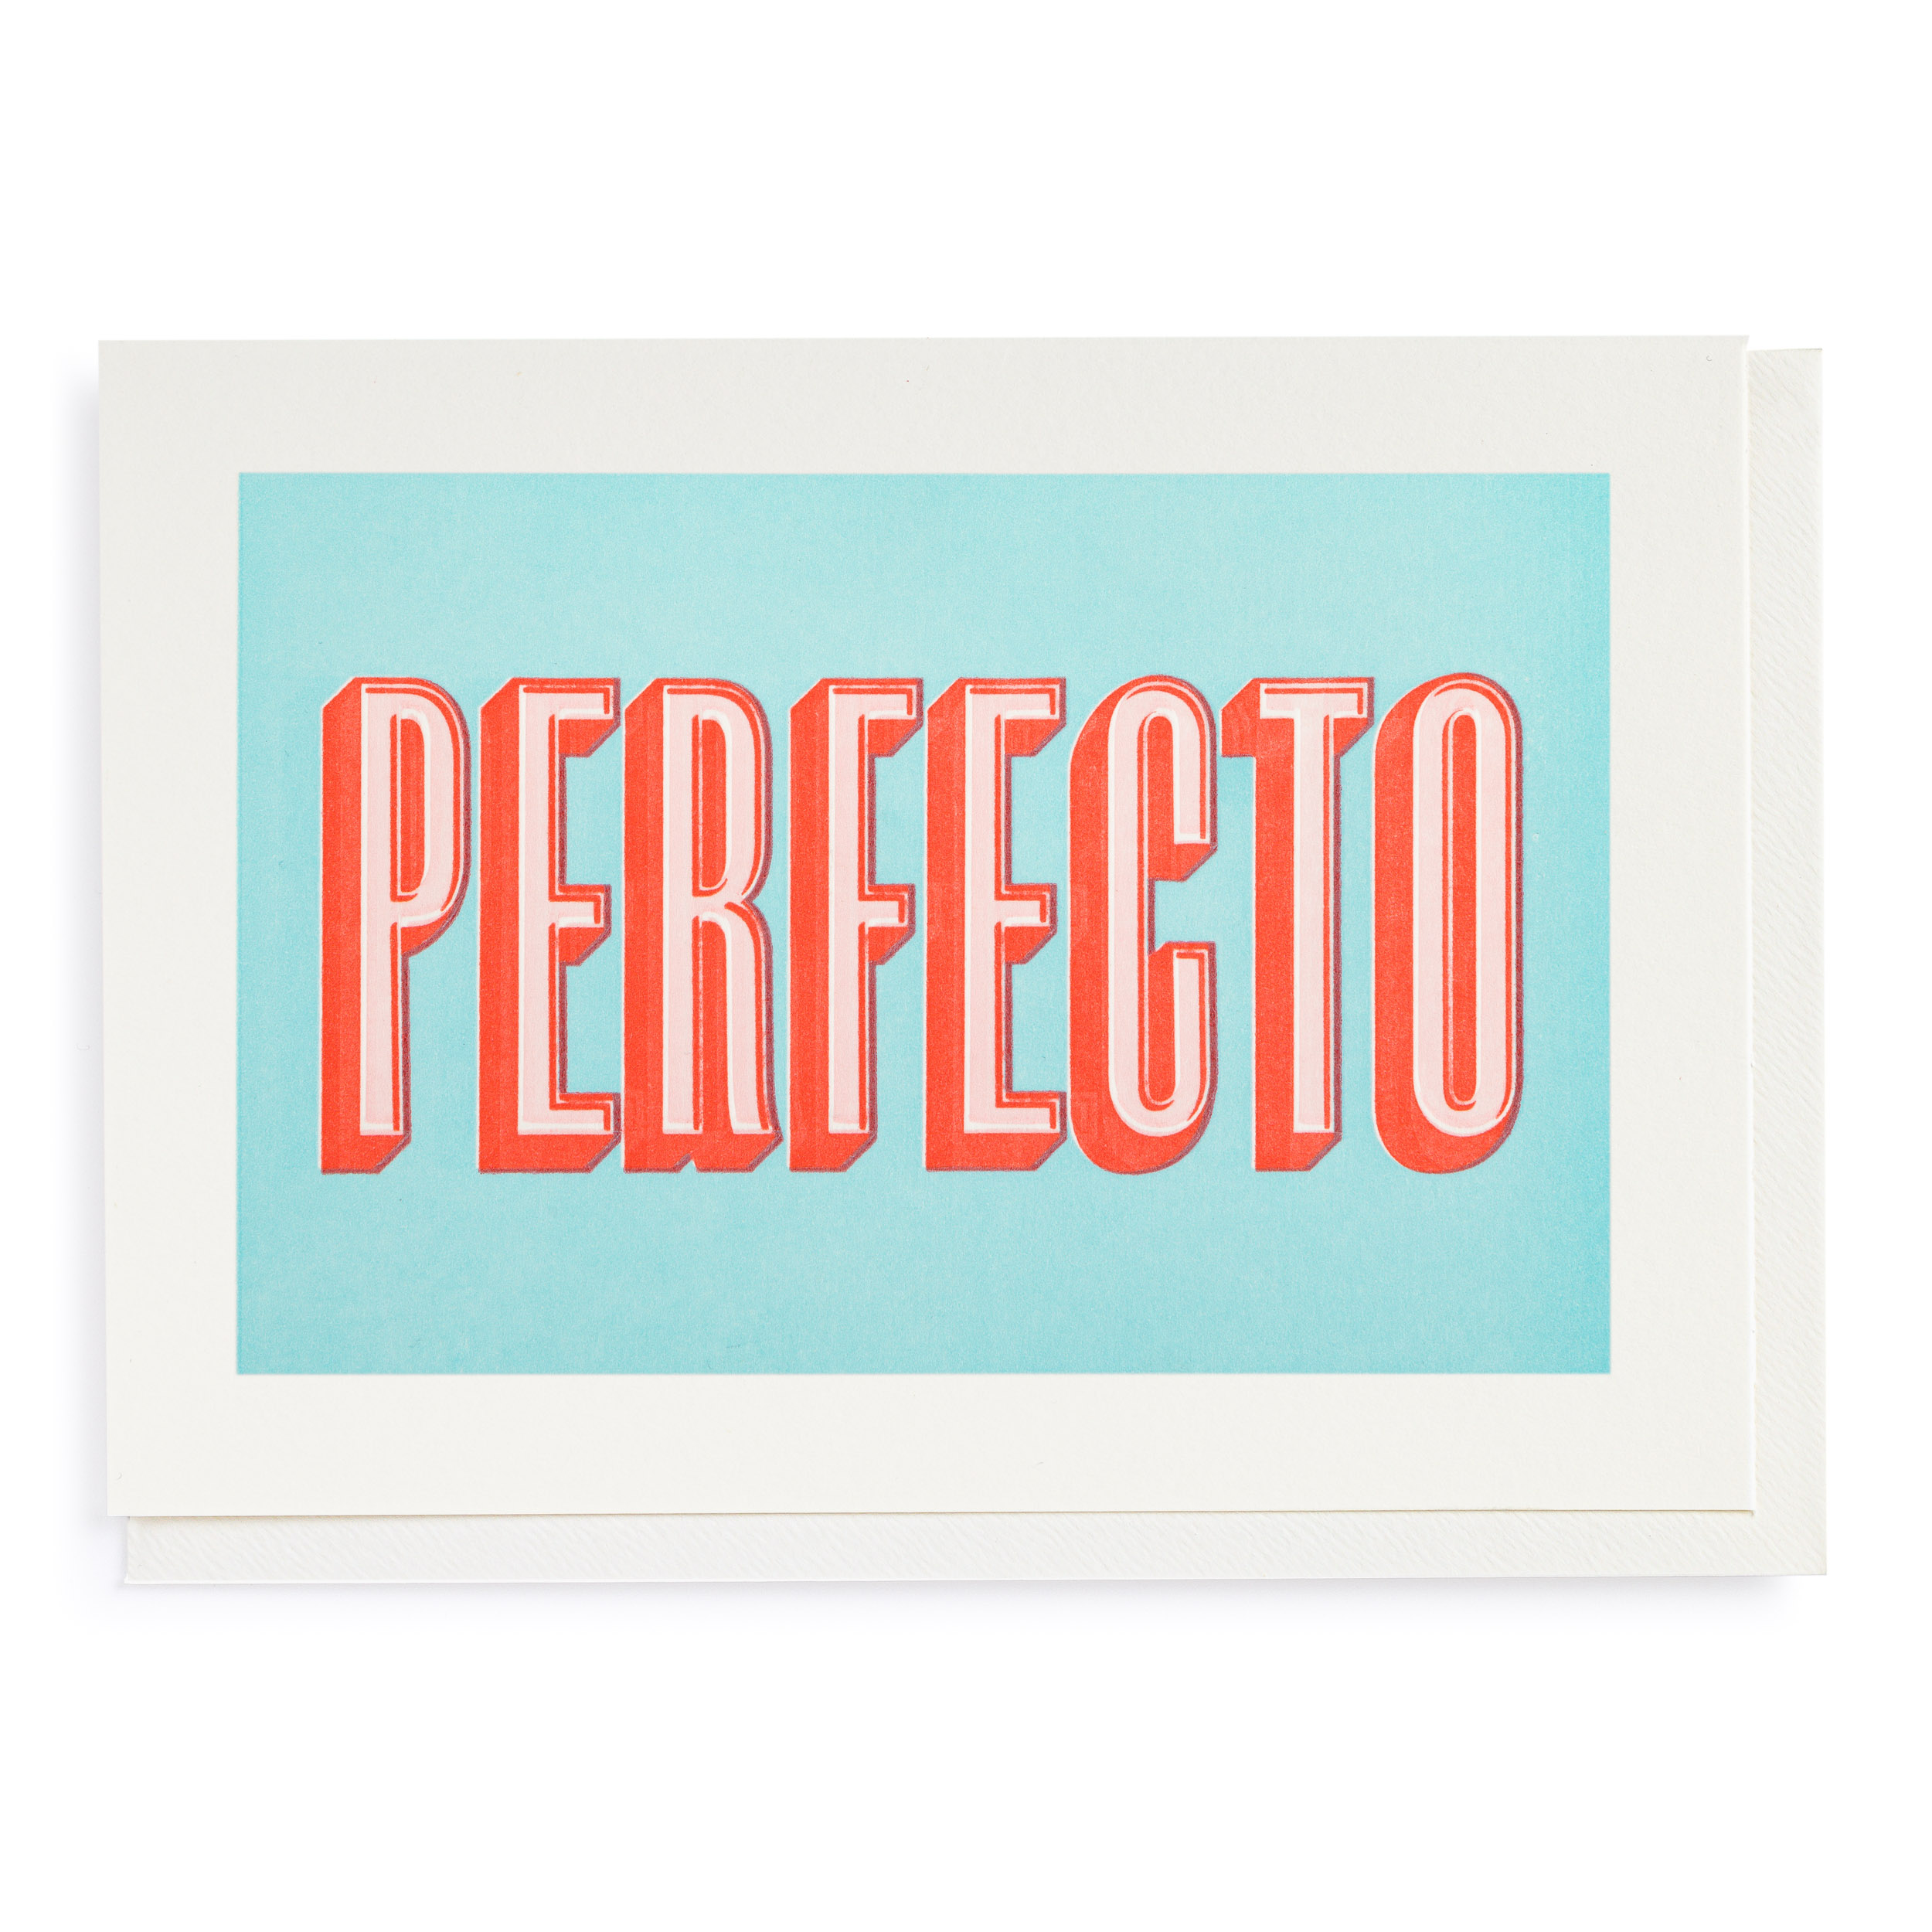 Perfecto - Letterpress Cards - Thomas Mayo - from Archivist Gallery 